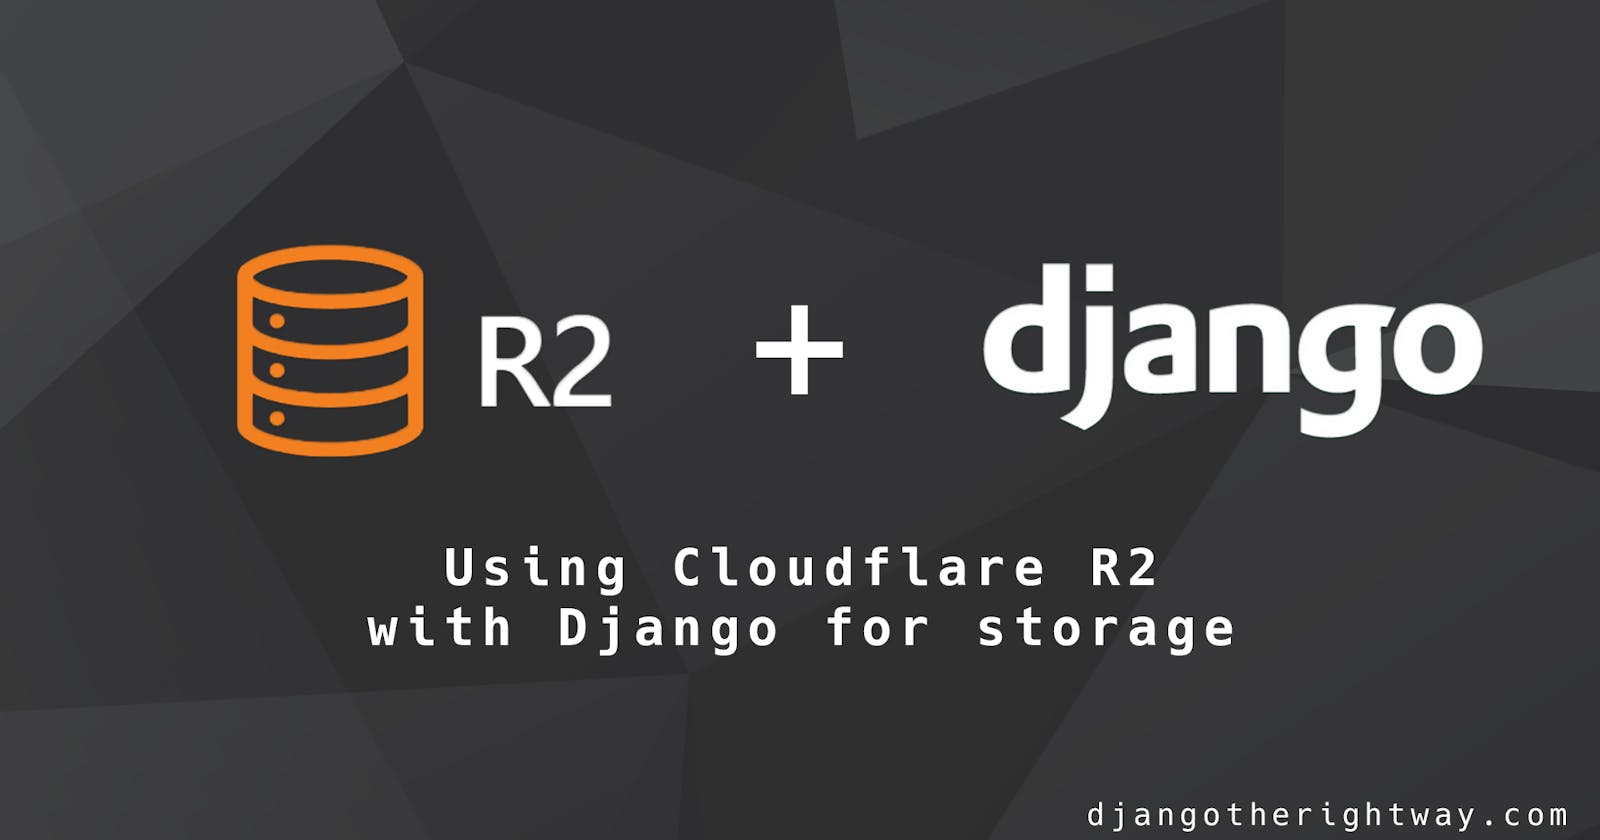 Using Cloudflare R2 with Django for storage